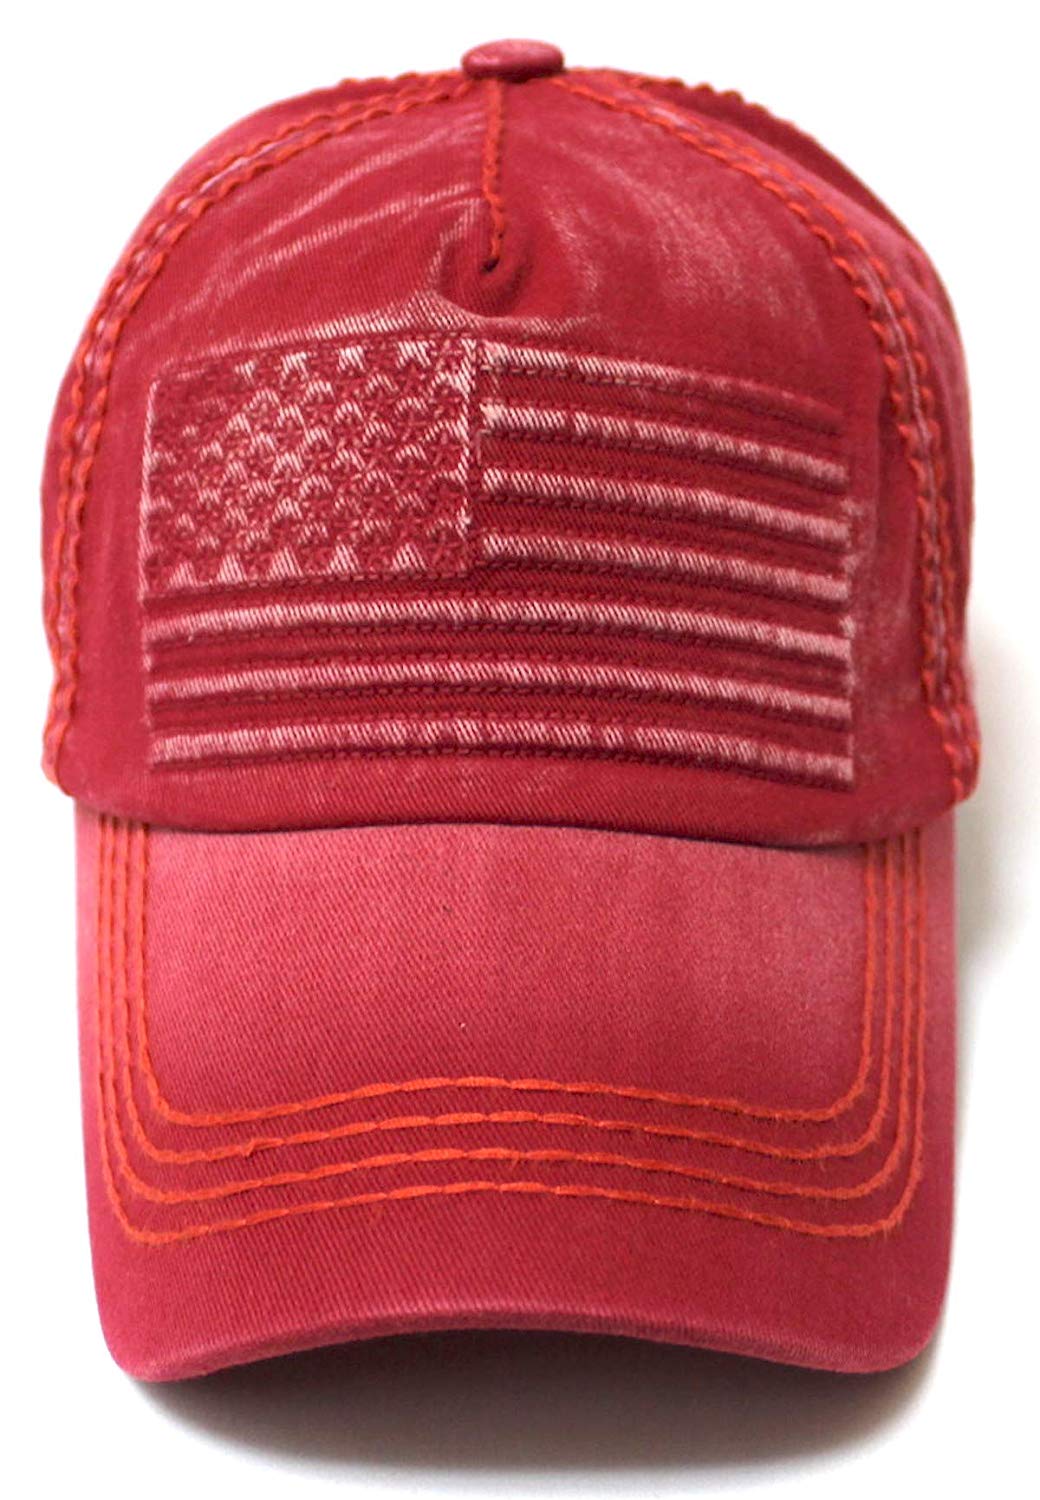 Classic Low Profile USA Flag Embroidery Ball Cap, Washed Vintage Red - Caps 'N Vintage 